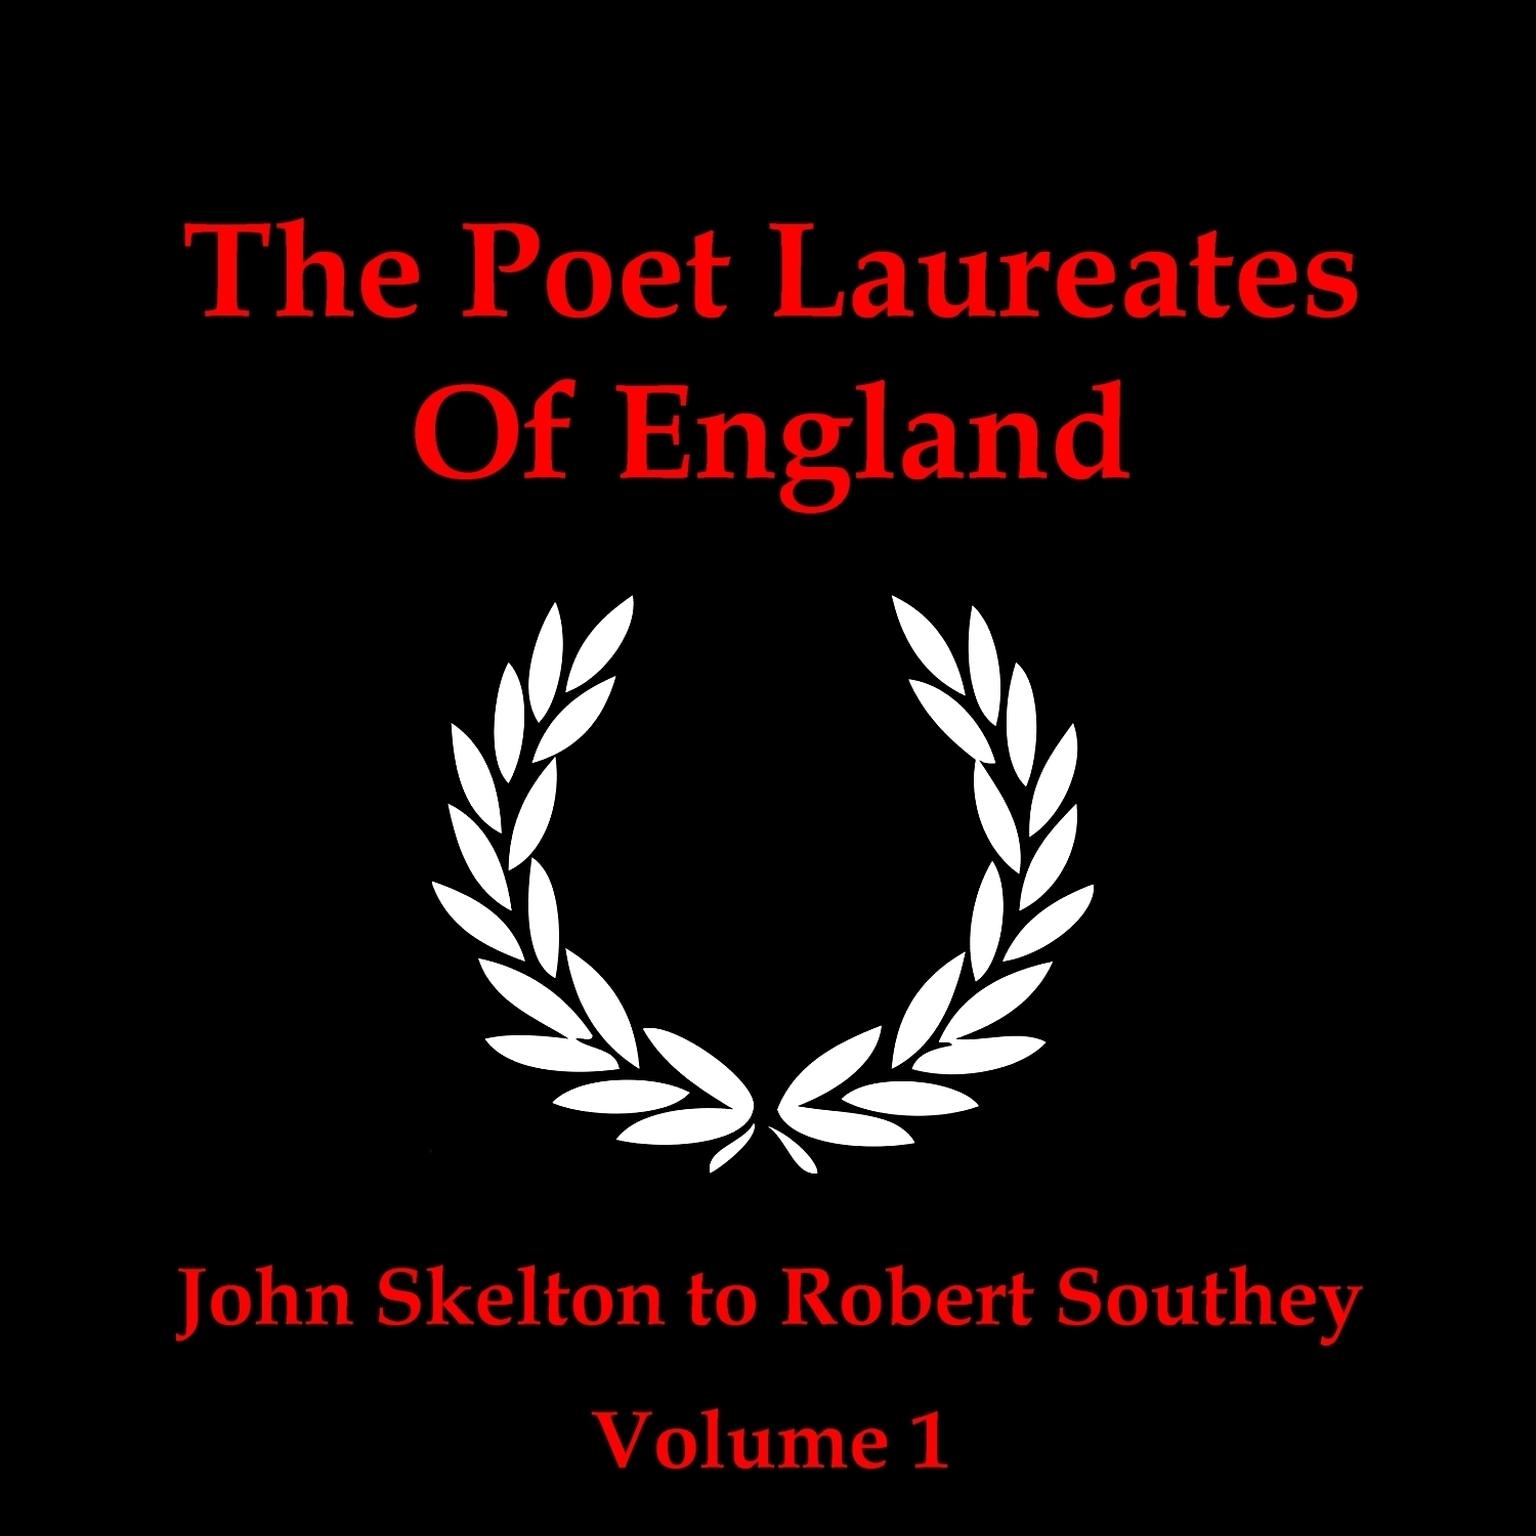 The Poet Laureates, Vol. 1: John Skelton to Robert Southey Audiobook, by various authors